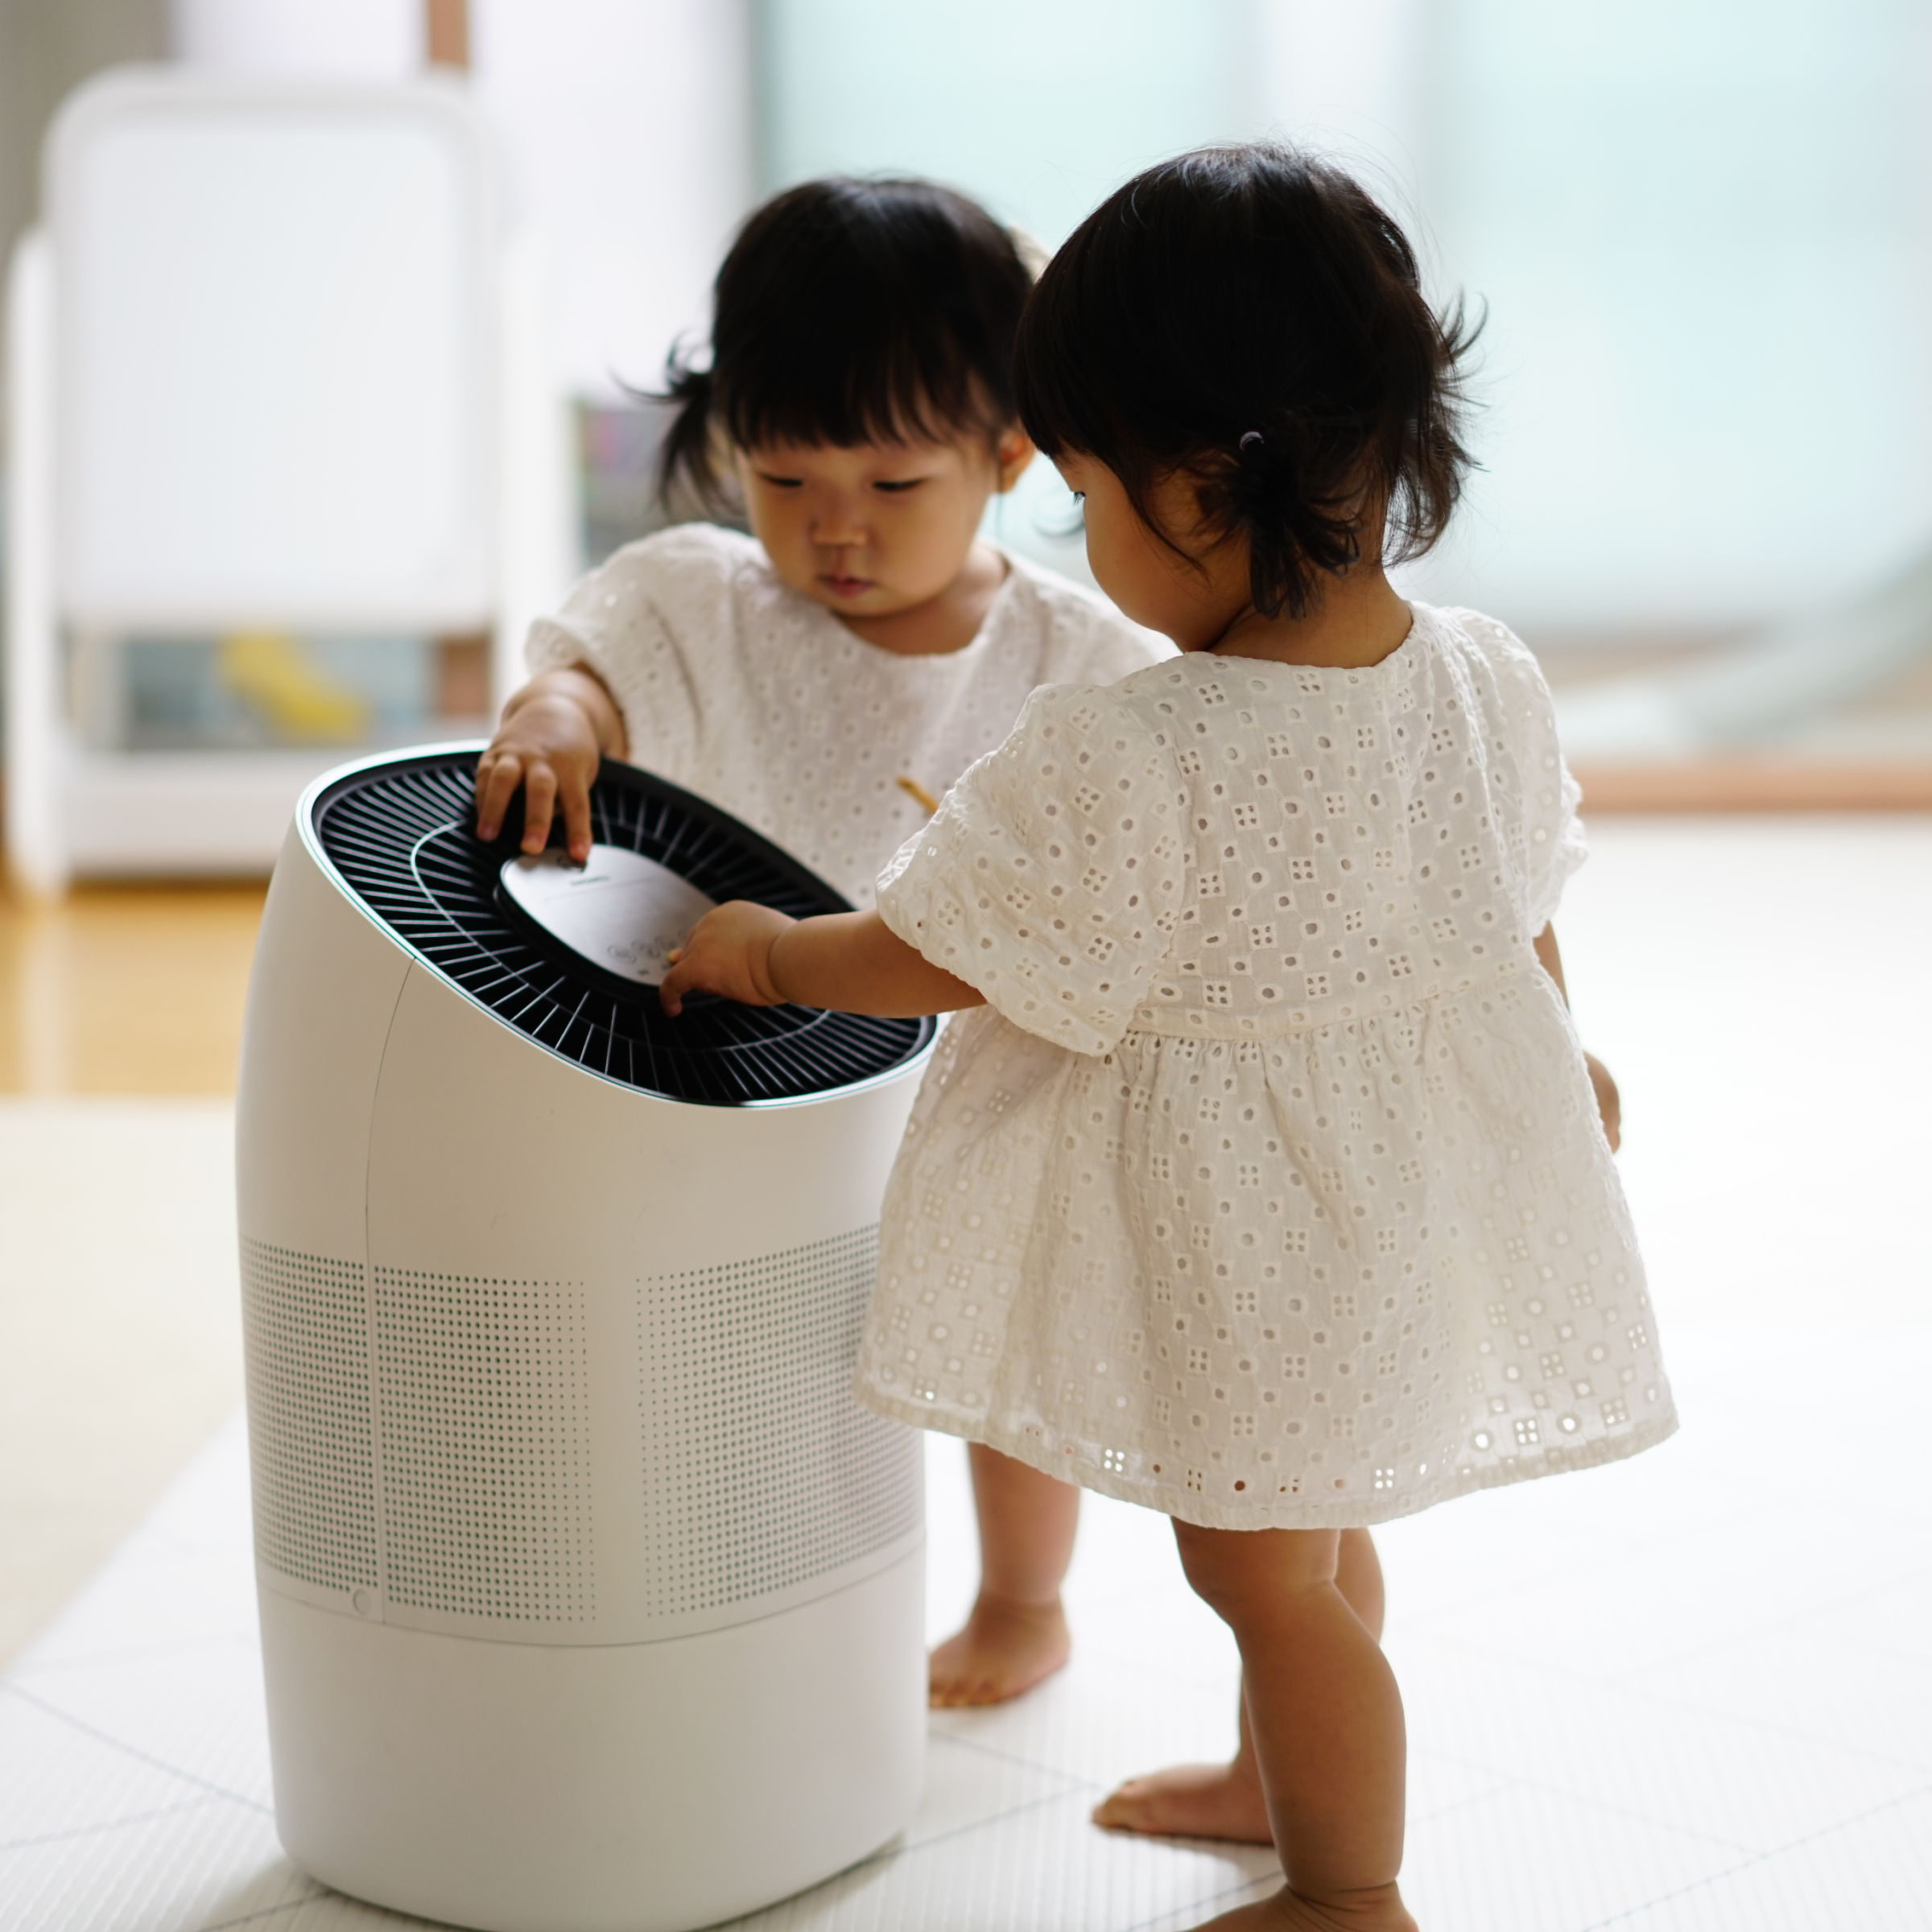 Two twin girl toddlers curiously touching Zenwell Super Humidifier Smart touch display